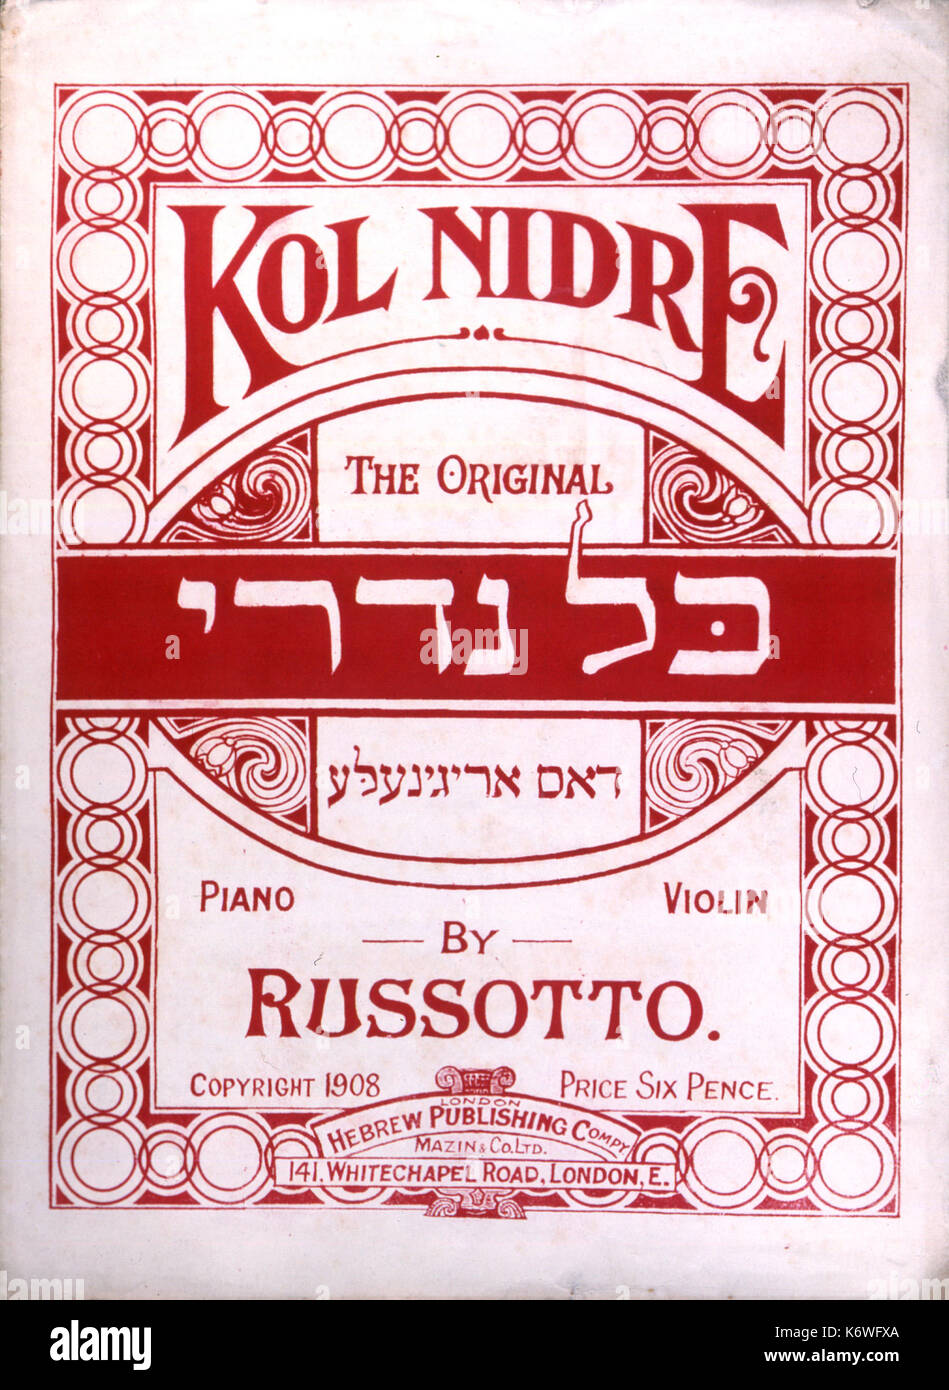 JEWISH MUSIC - KOL NIDRE Cover of score for arrangement for piano 7 voice by RUSSOTTO, 1908. Prayer sung at Yom Kippur.       BRUCH. Also written in Yiddish. Stock Photo